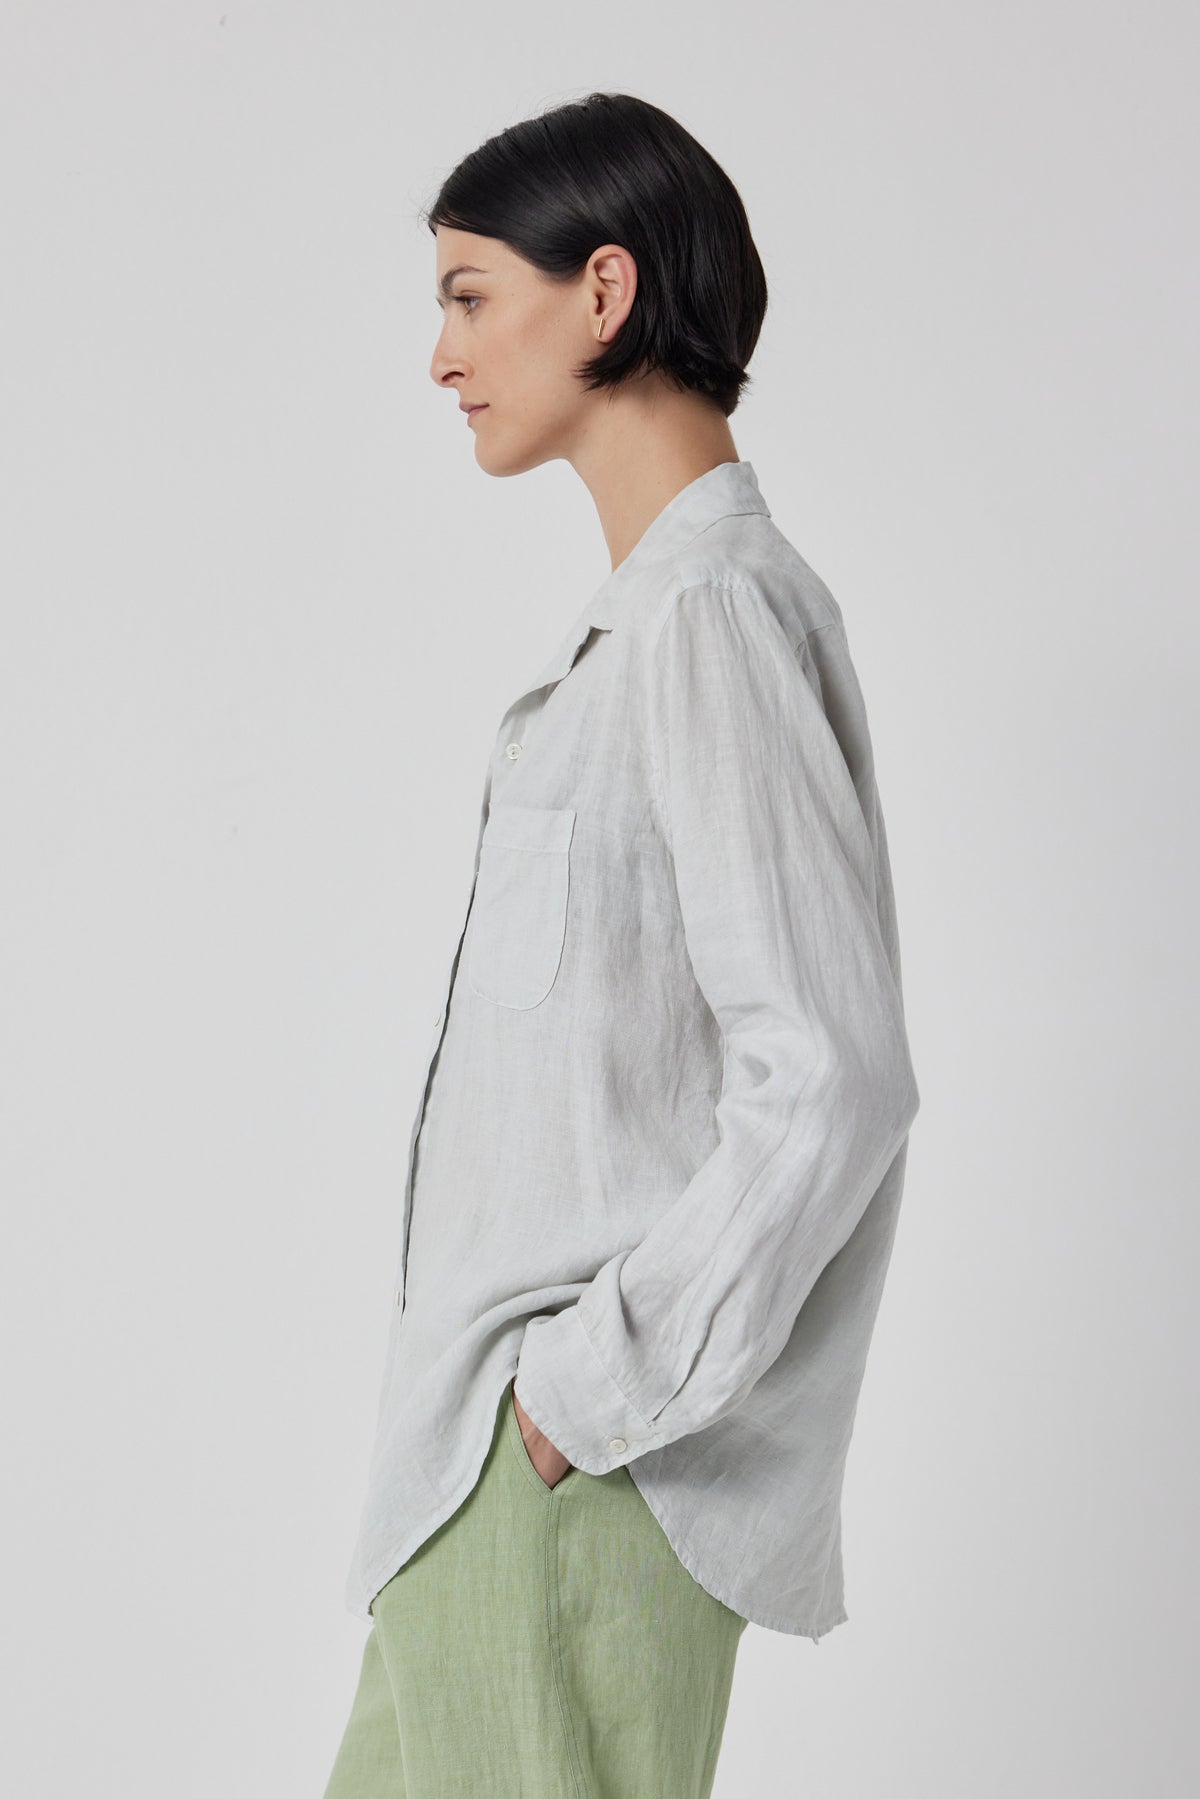 A person with short dark hair is standing in profile, wearing a MULHOLLAND LINEN SHIRT by Velvet by Jenny Graham with a scooped hemline and light green pants.-36212529725633